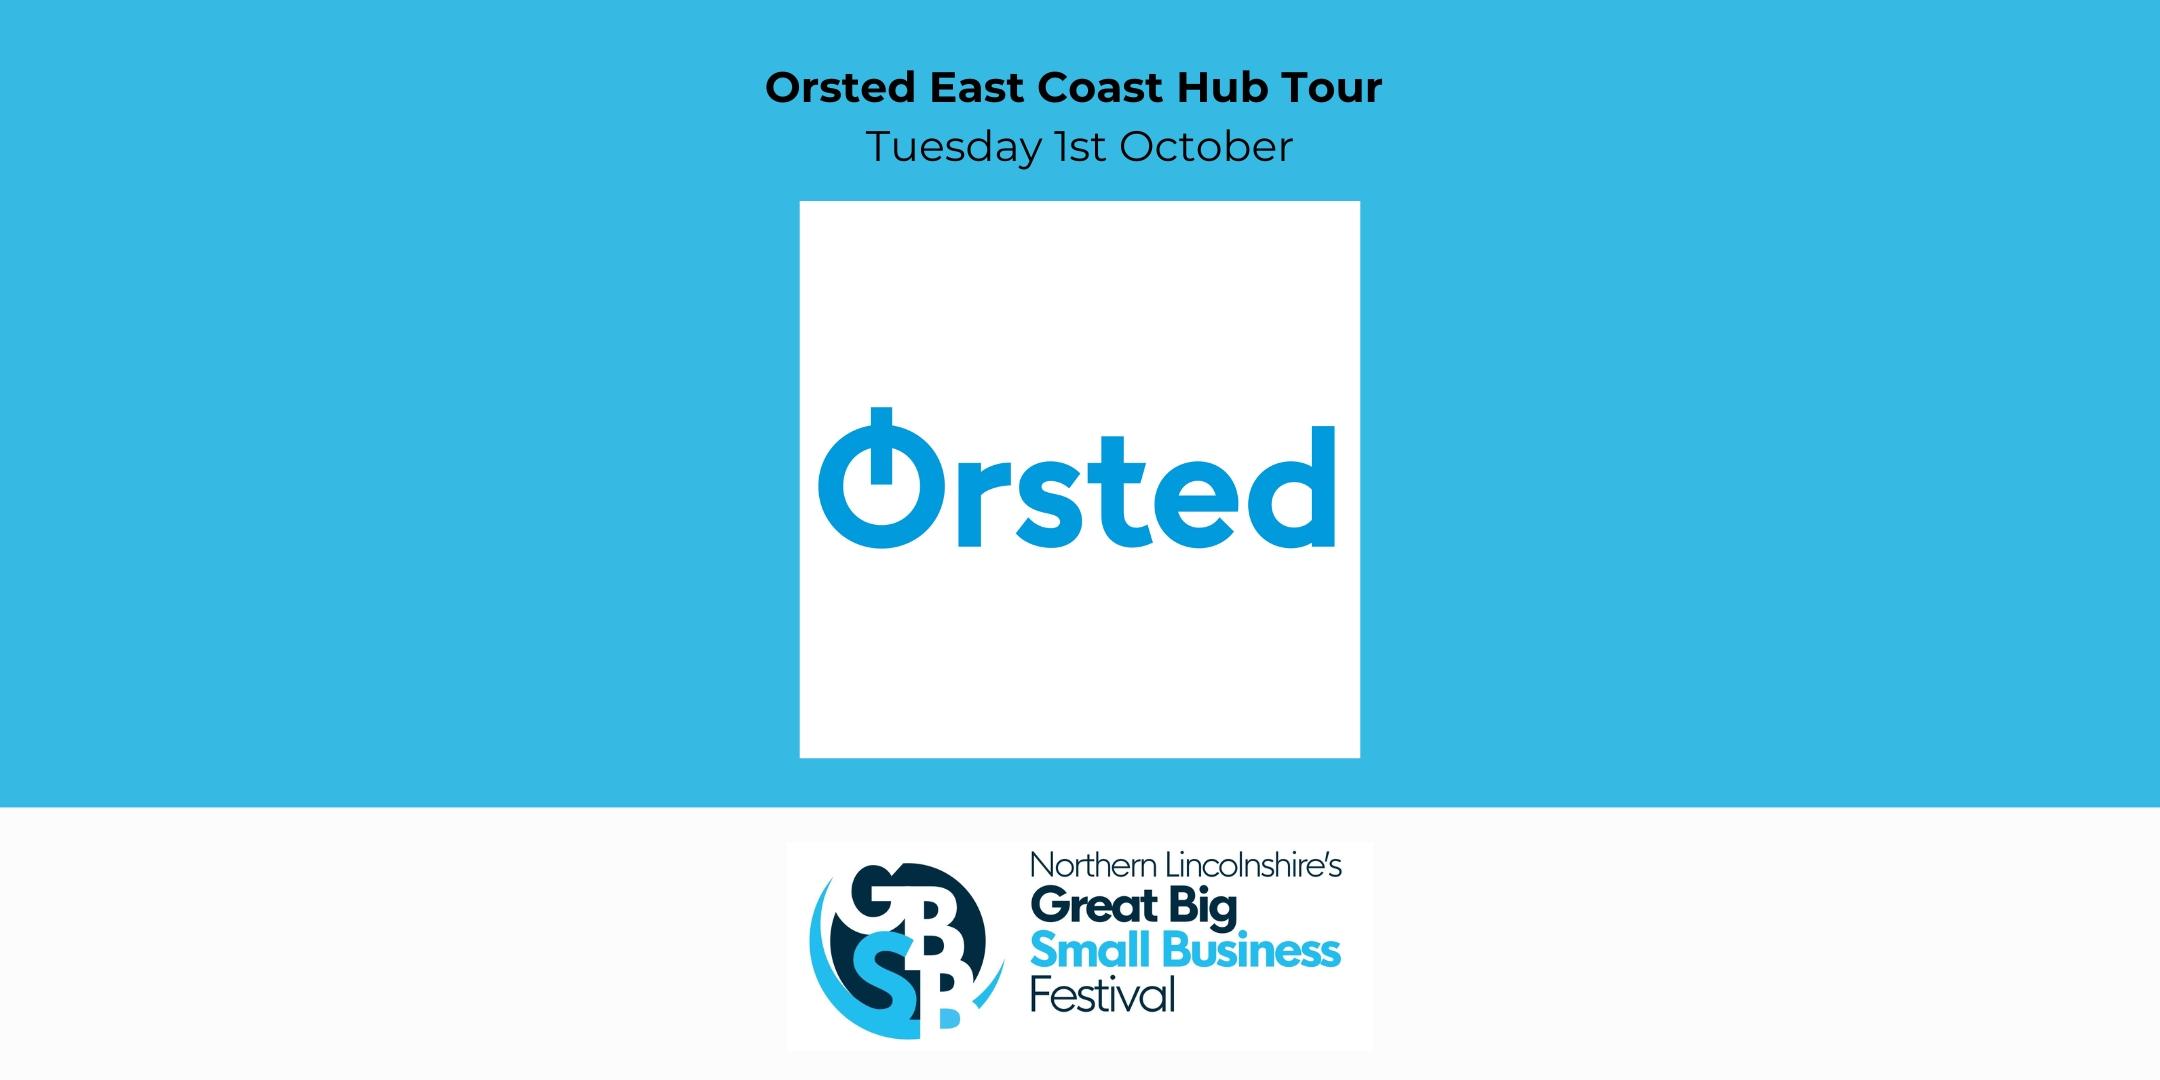 Promotional image for the Ørsted East Coast Hub Tour on Tuesday, 1st October, featuring Ørsted's logo and Northern Lincolnshire's Great Big Small Business Festival Week logo.